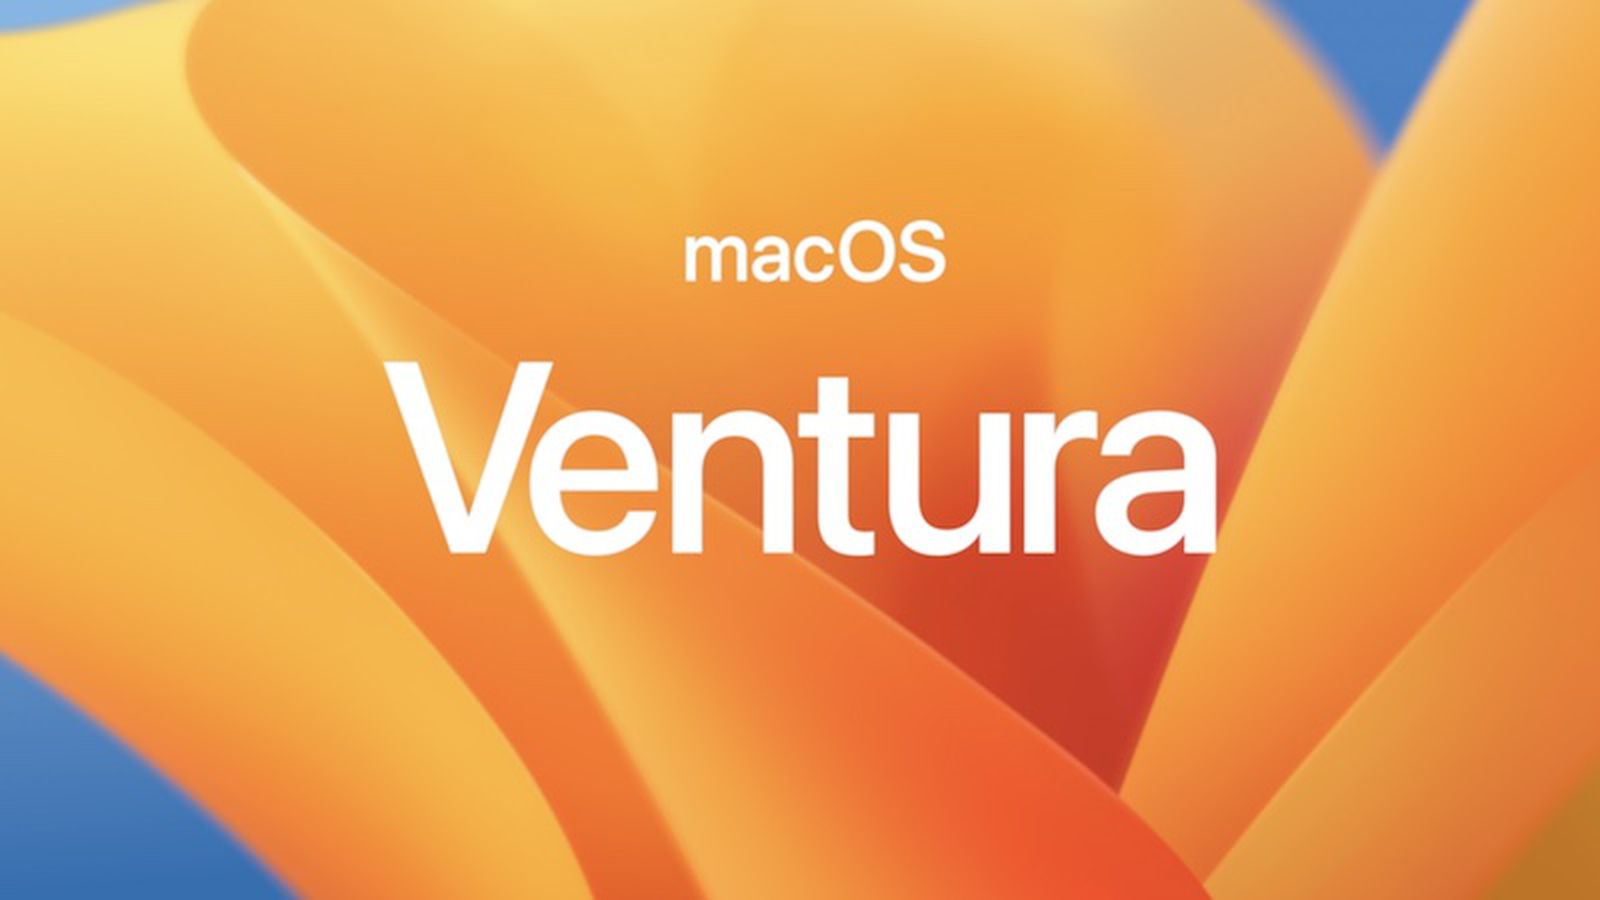 Use Caution Before Upgrading to macOS Ventura